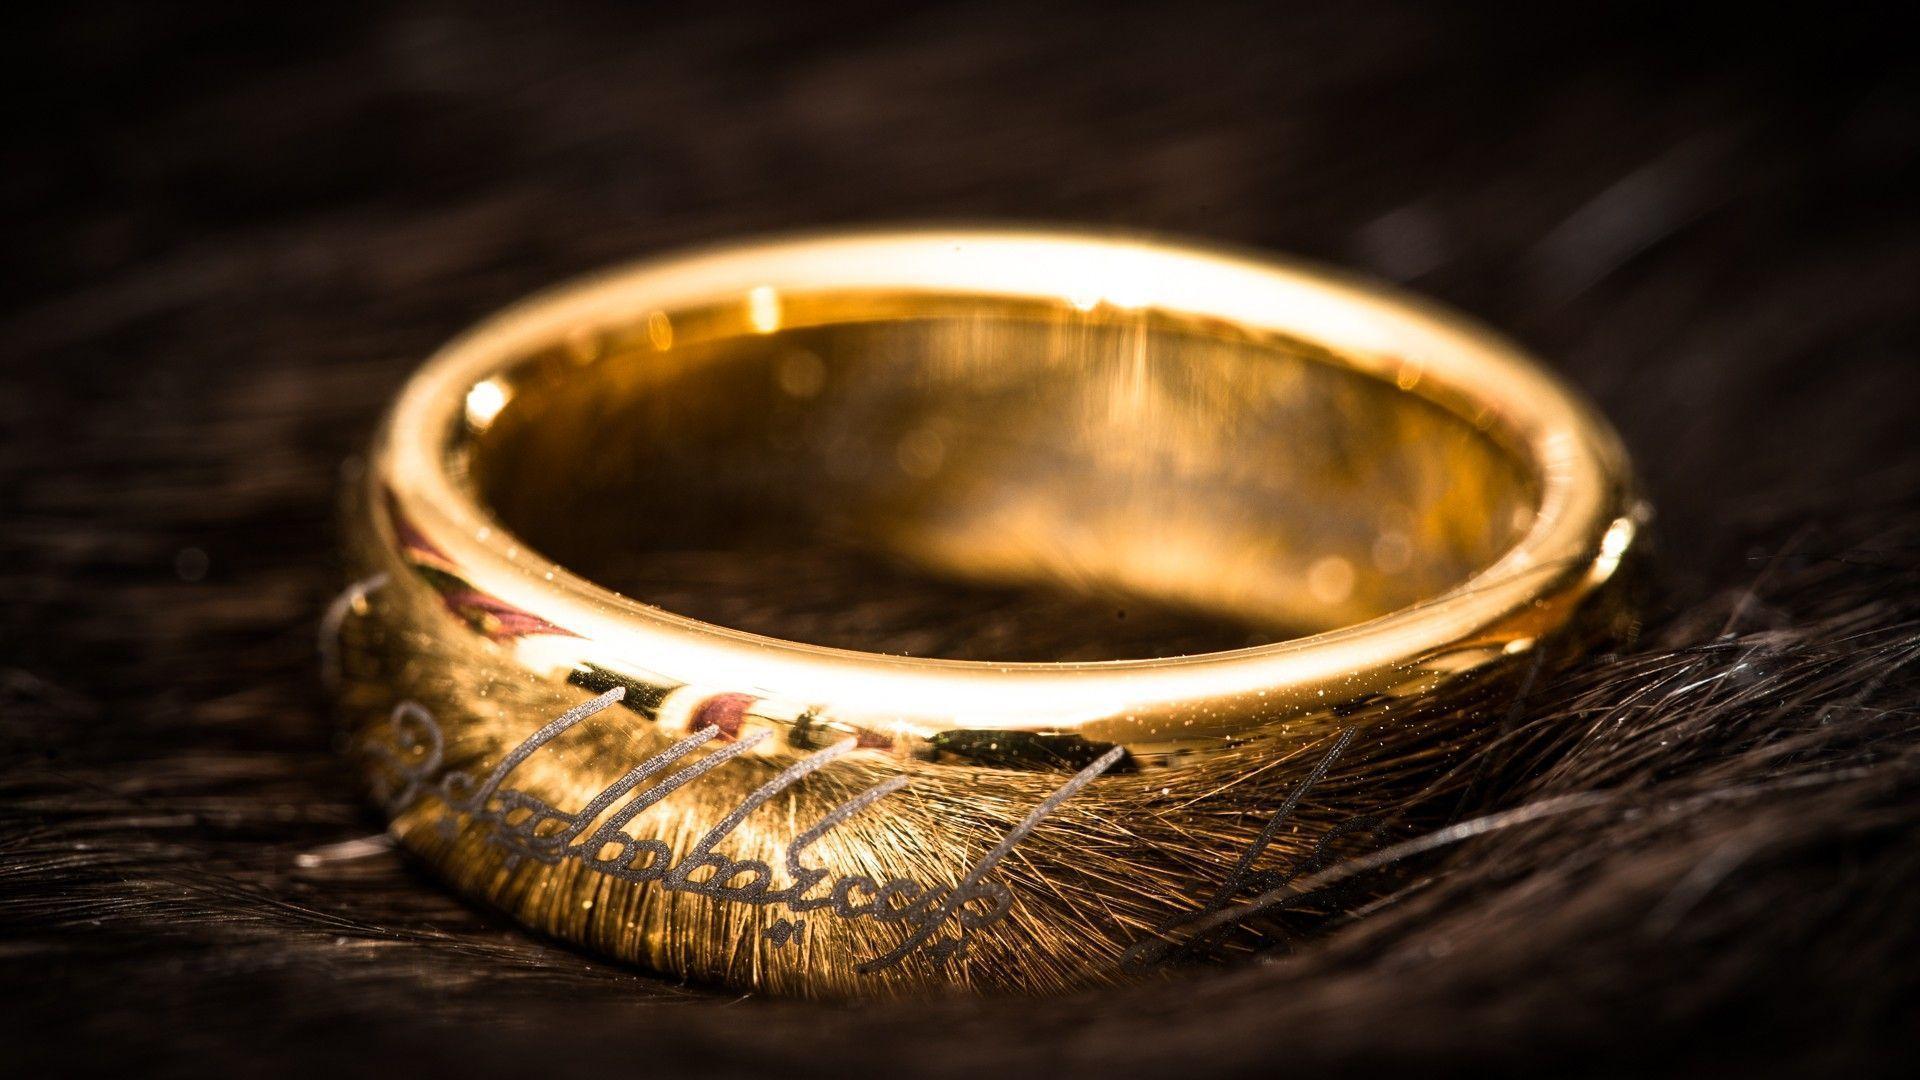 Rings The Lord of the Rings one ring wallpaperx1080